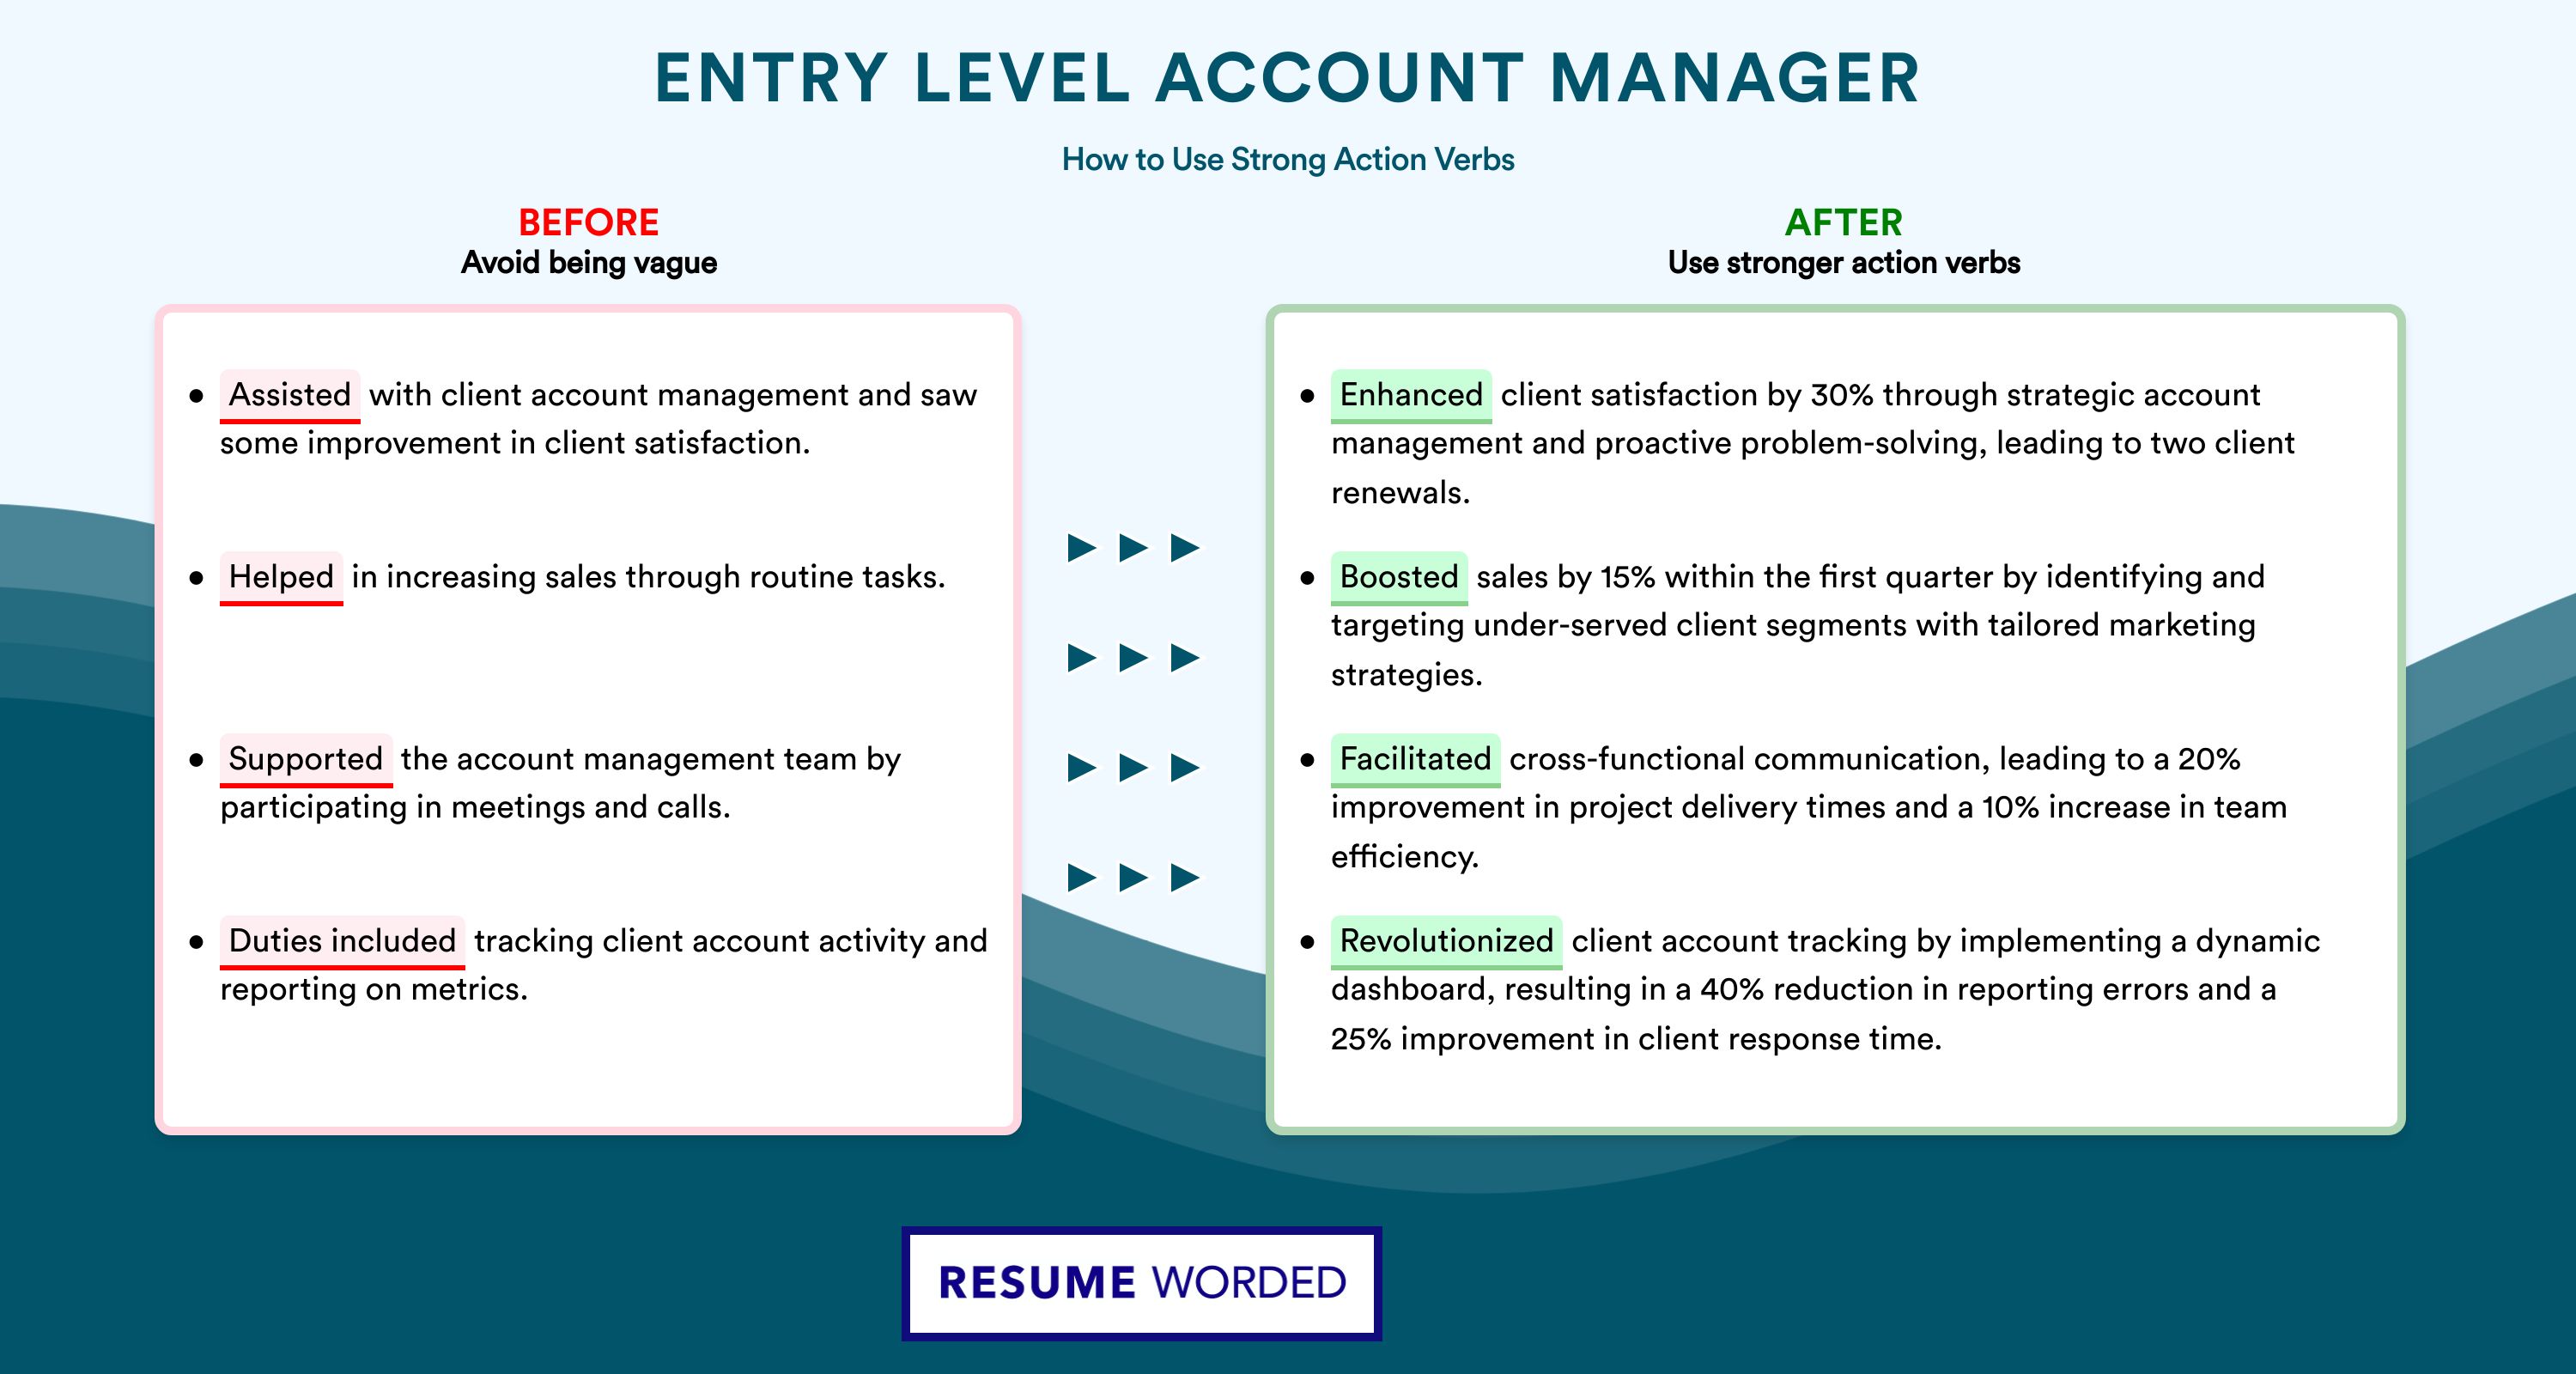 Action Verbs for Entry Level Account Manager